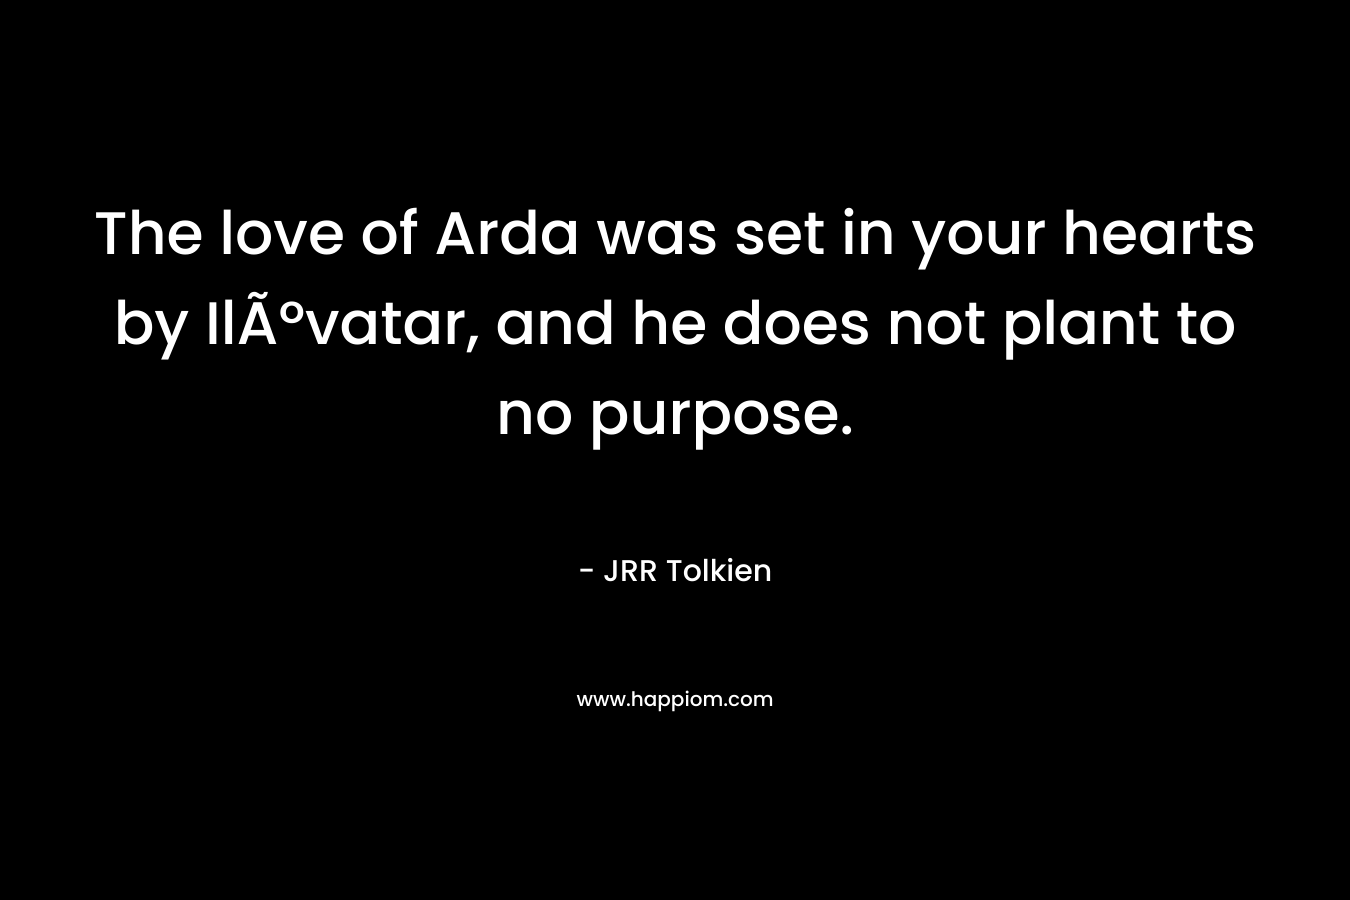 The love of Arda was set in your hearts by IlÃºvatar, and he does not plant to no purpose.